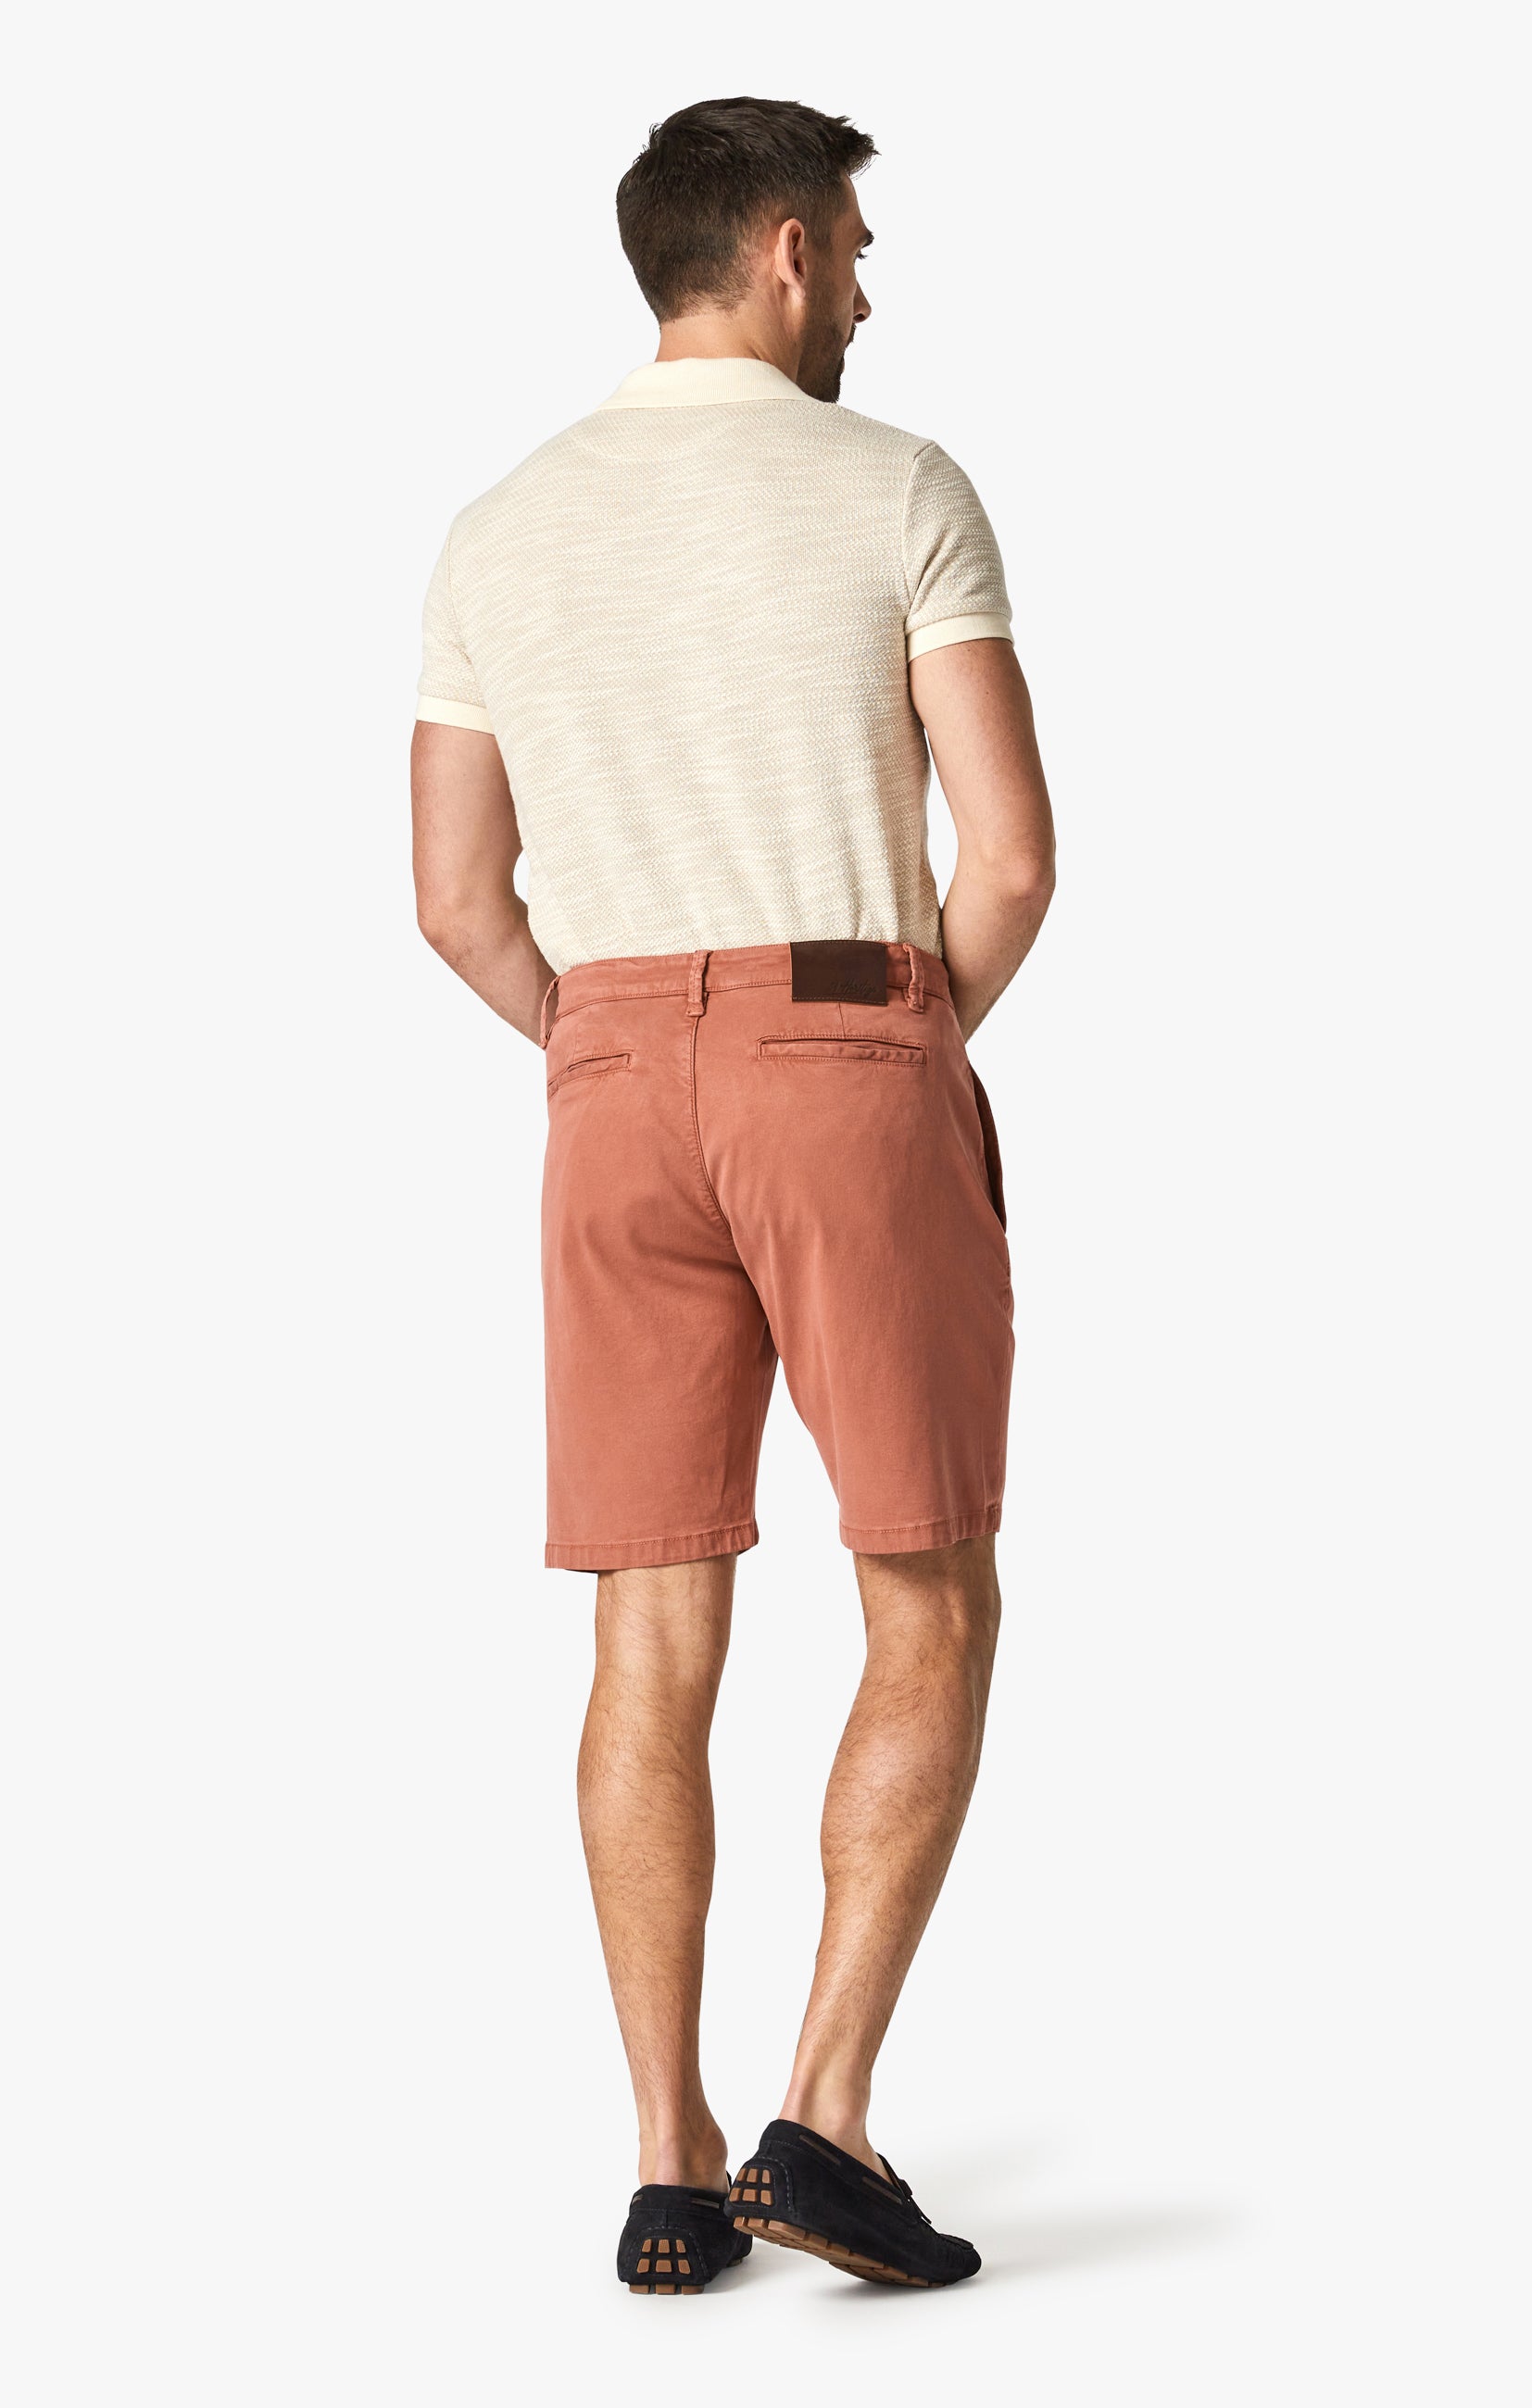 Nevada Shorts In Brick Soft Touch